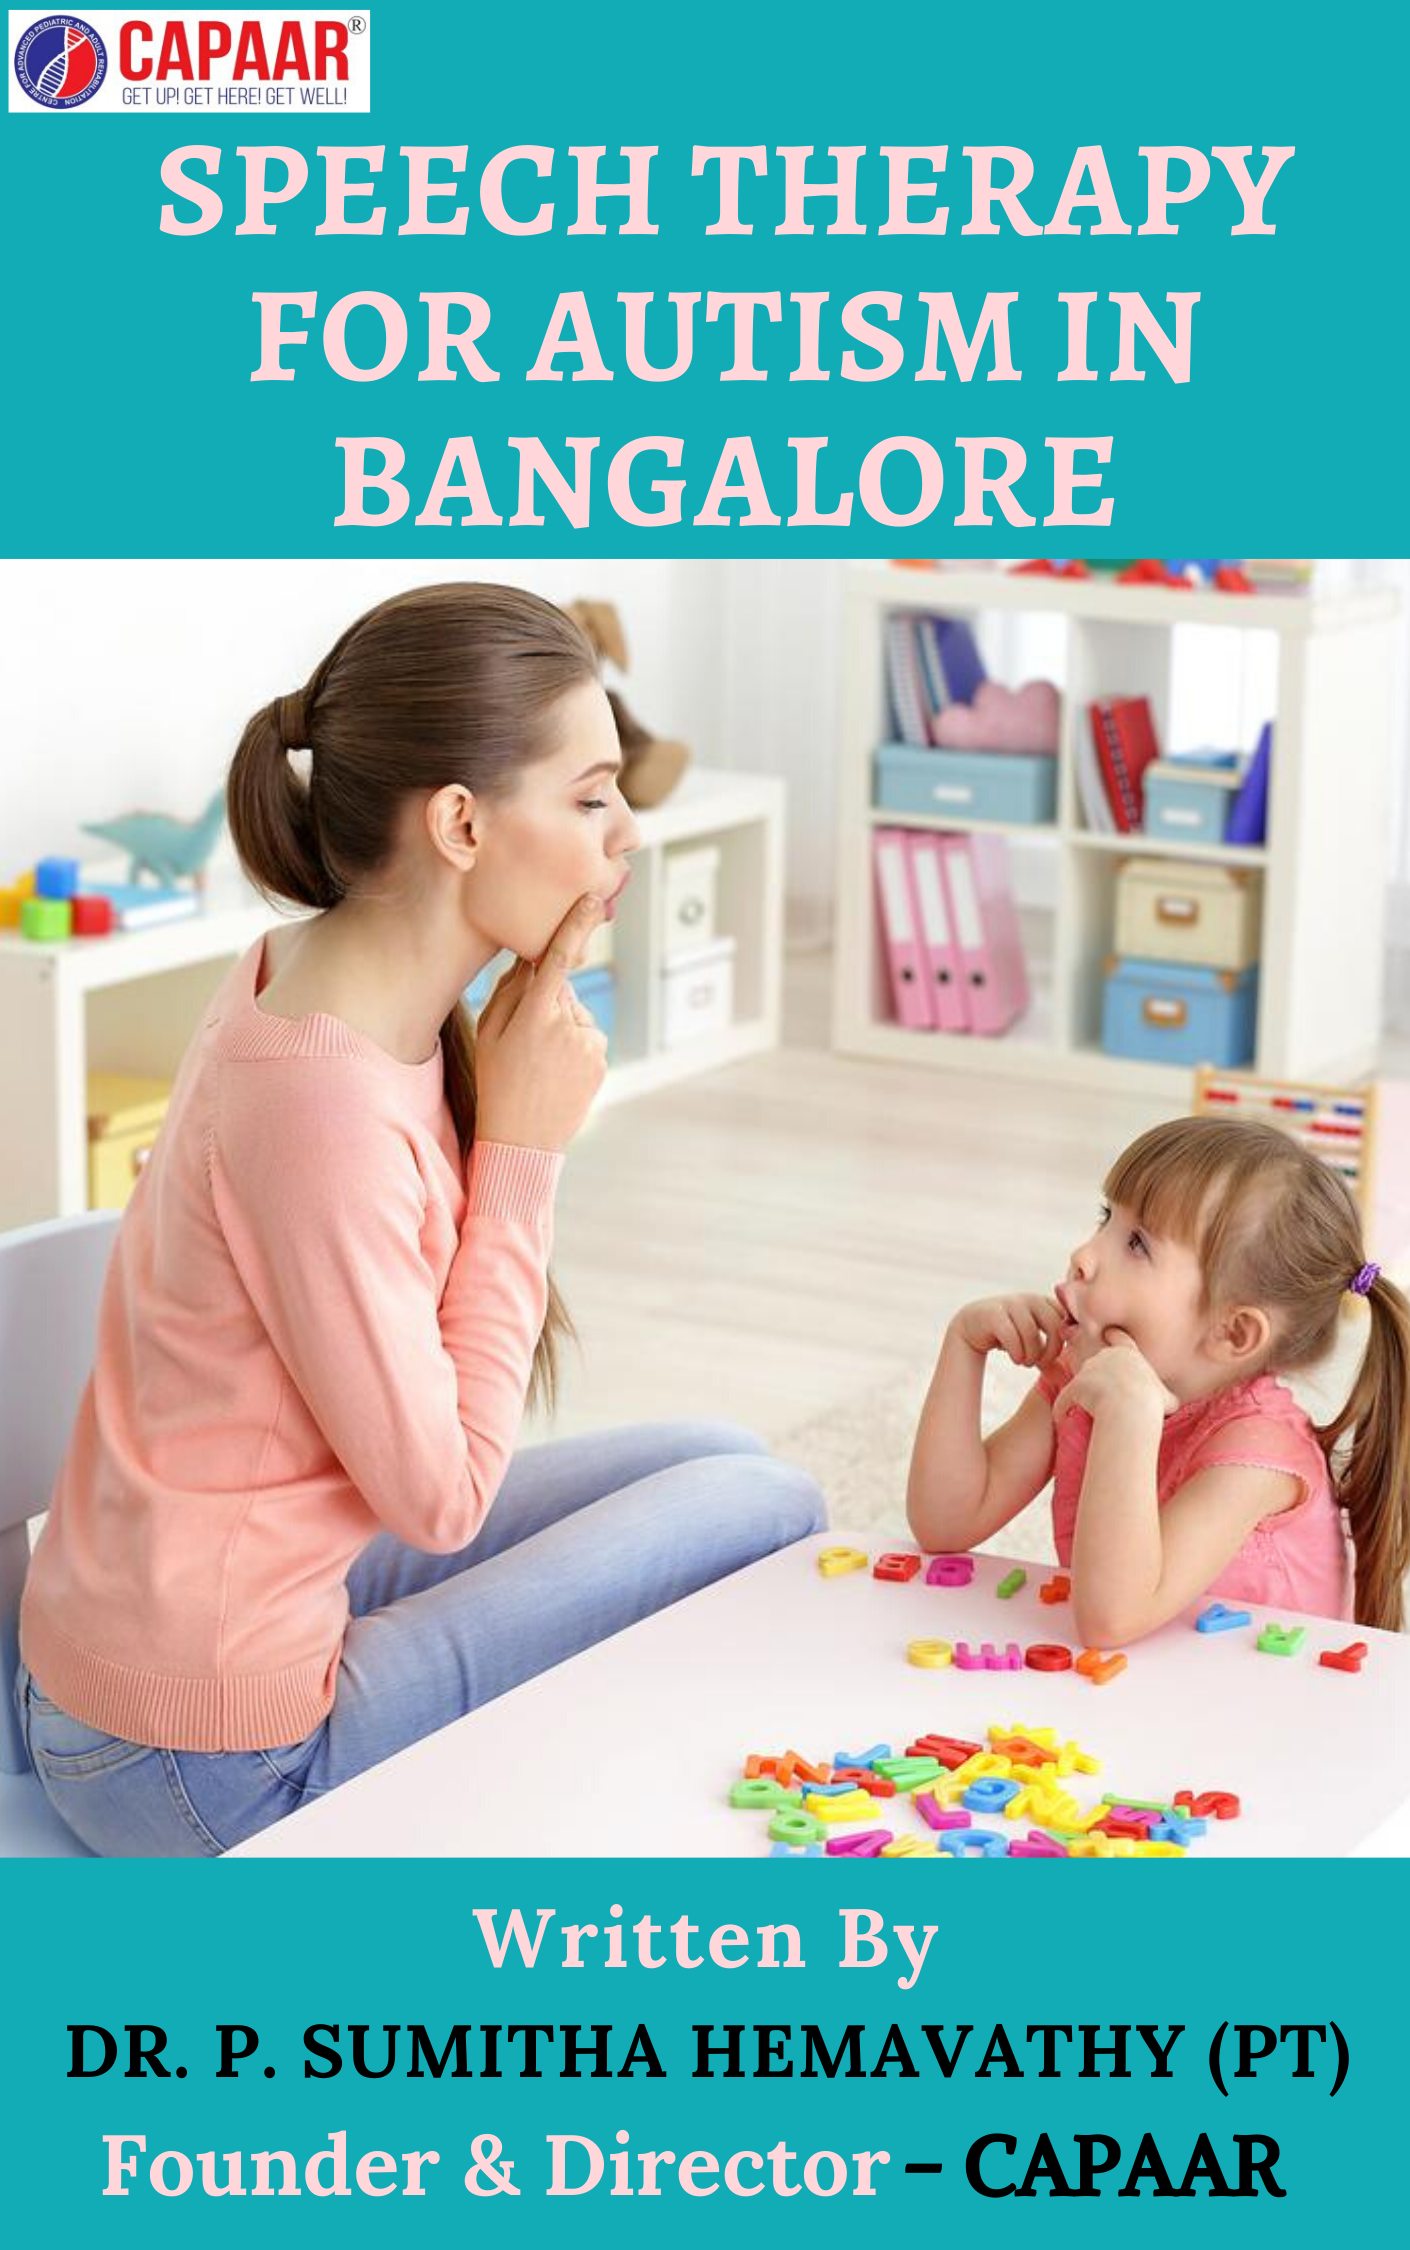 Speech therapy for Autism in Bangalore